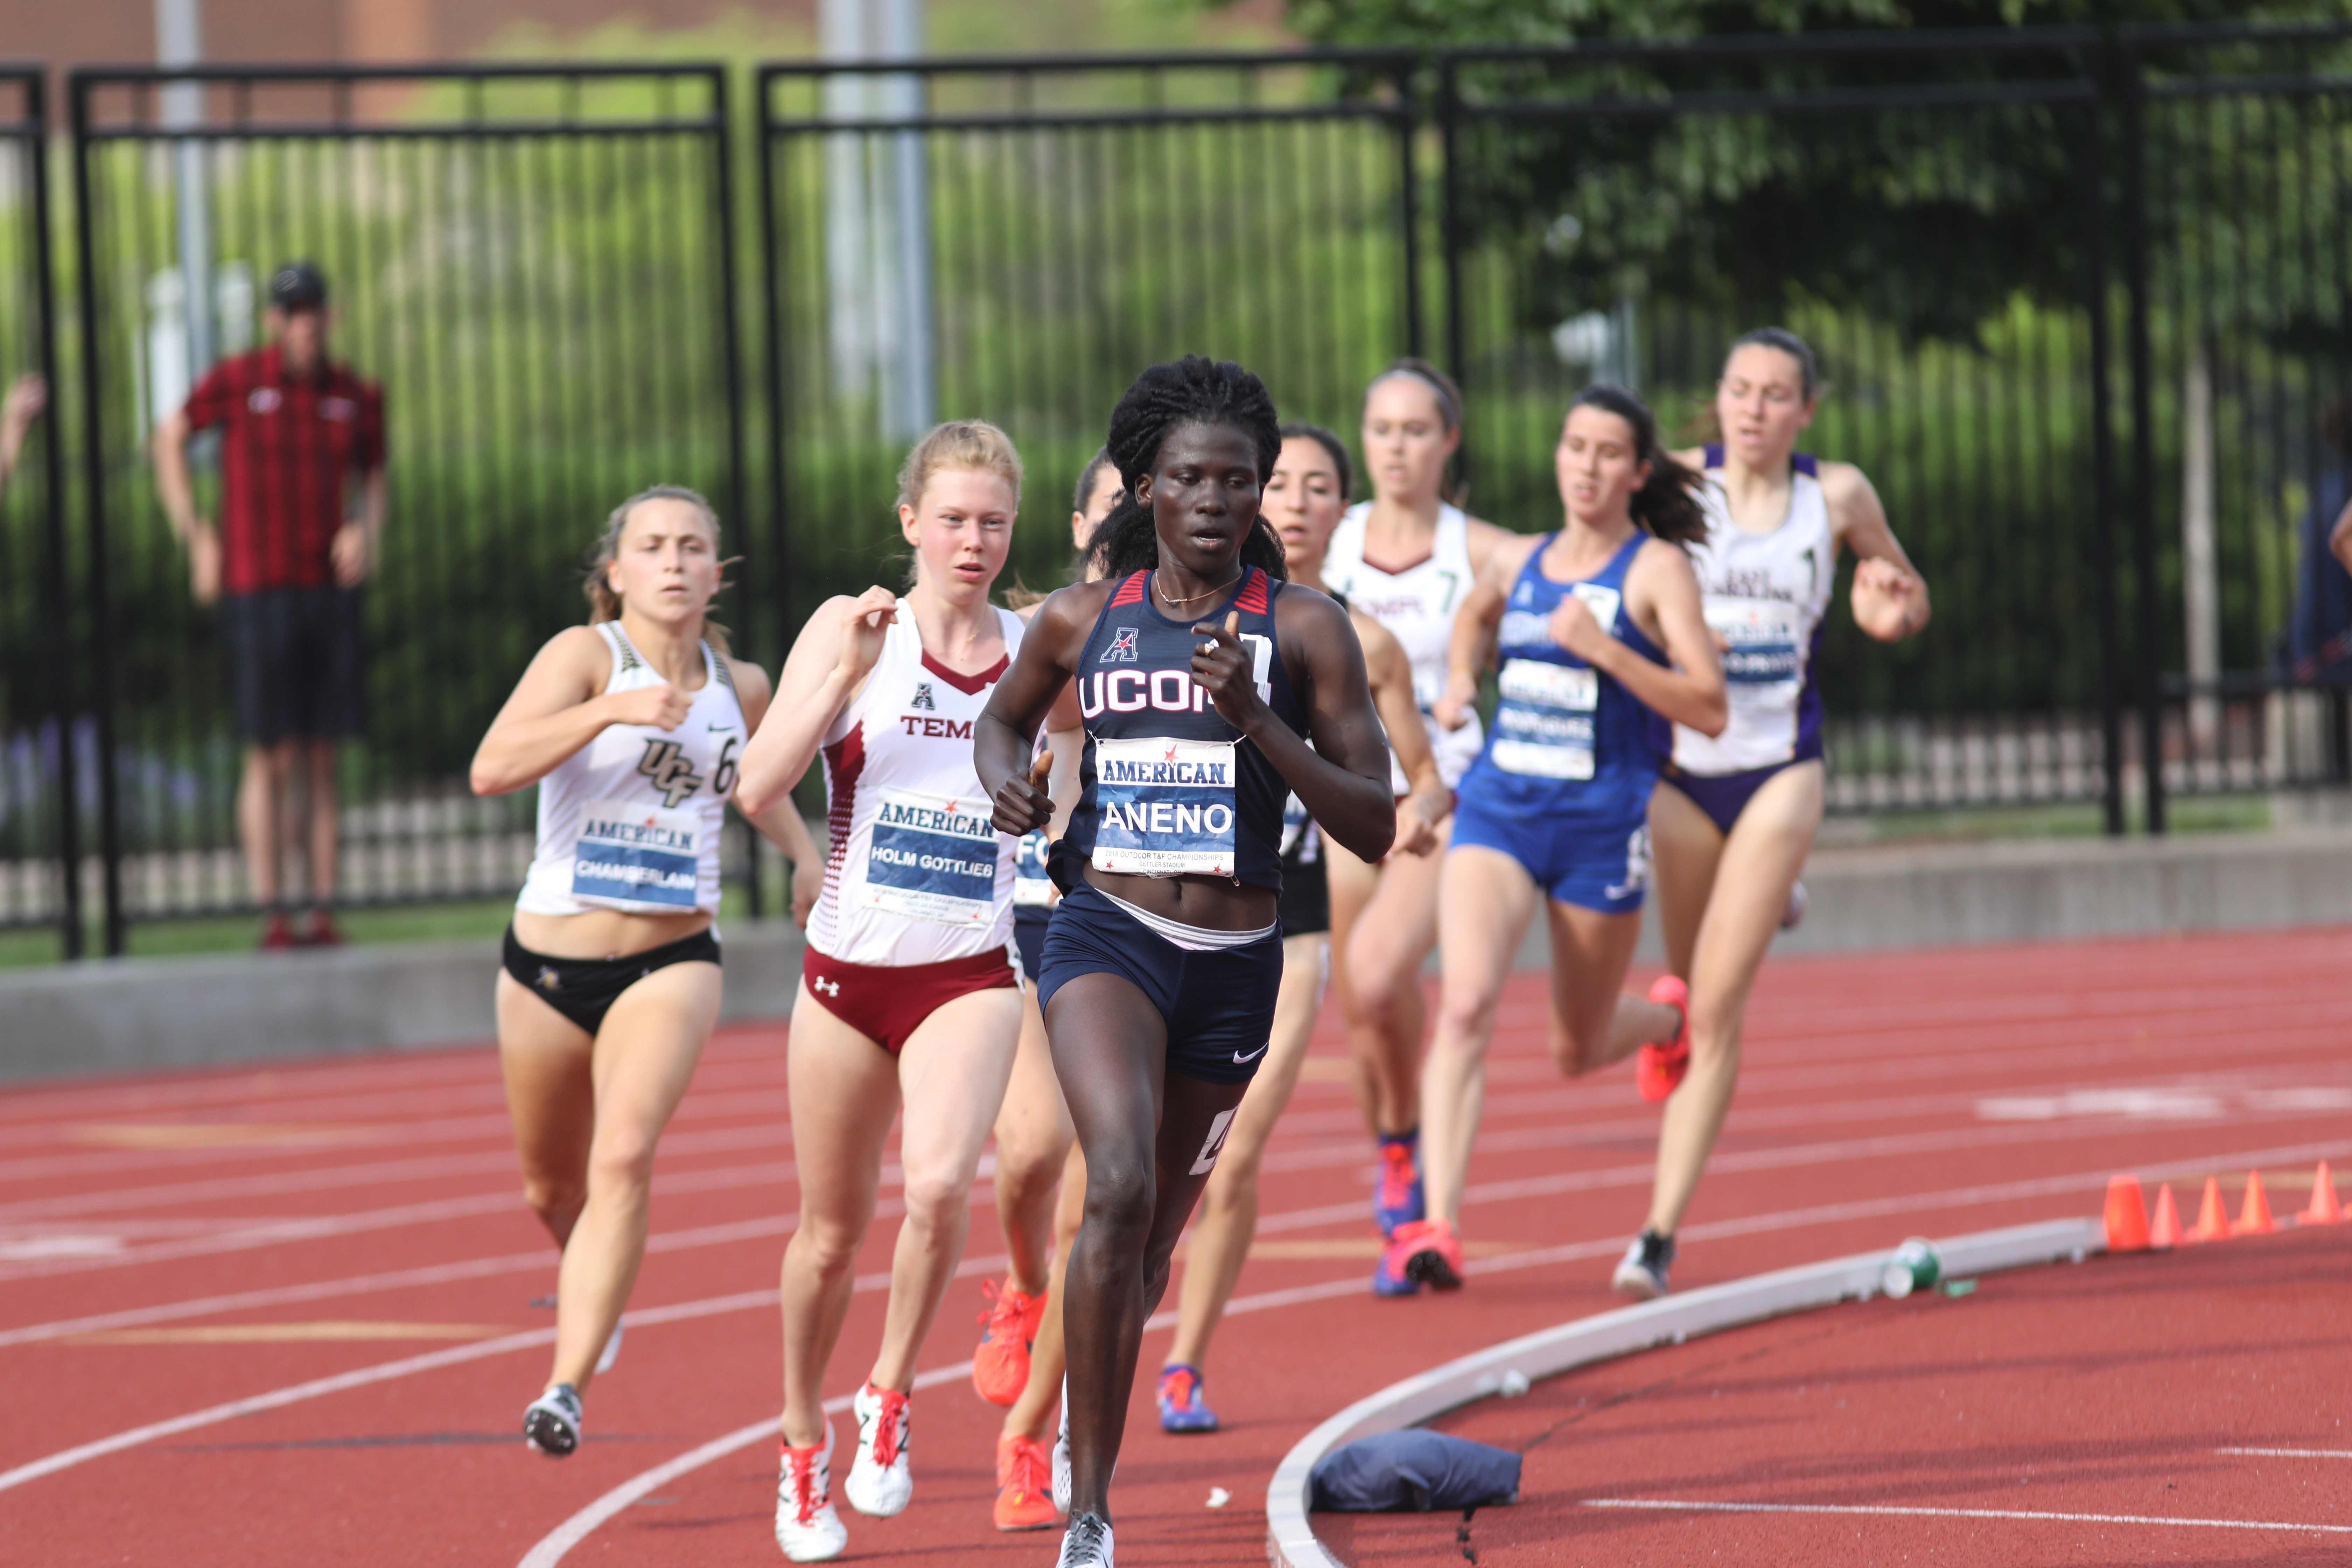 Susan Aneno, a junior, set a new conference meet record in the 800 m race on May 13, helping the Huskies finish fourth at the outdoor championship. (American Athletic Conference Photo)